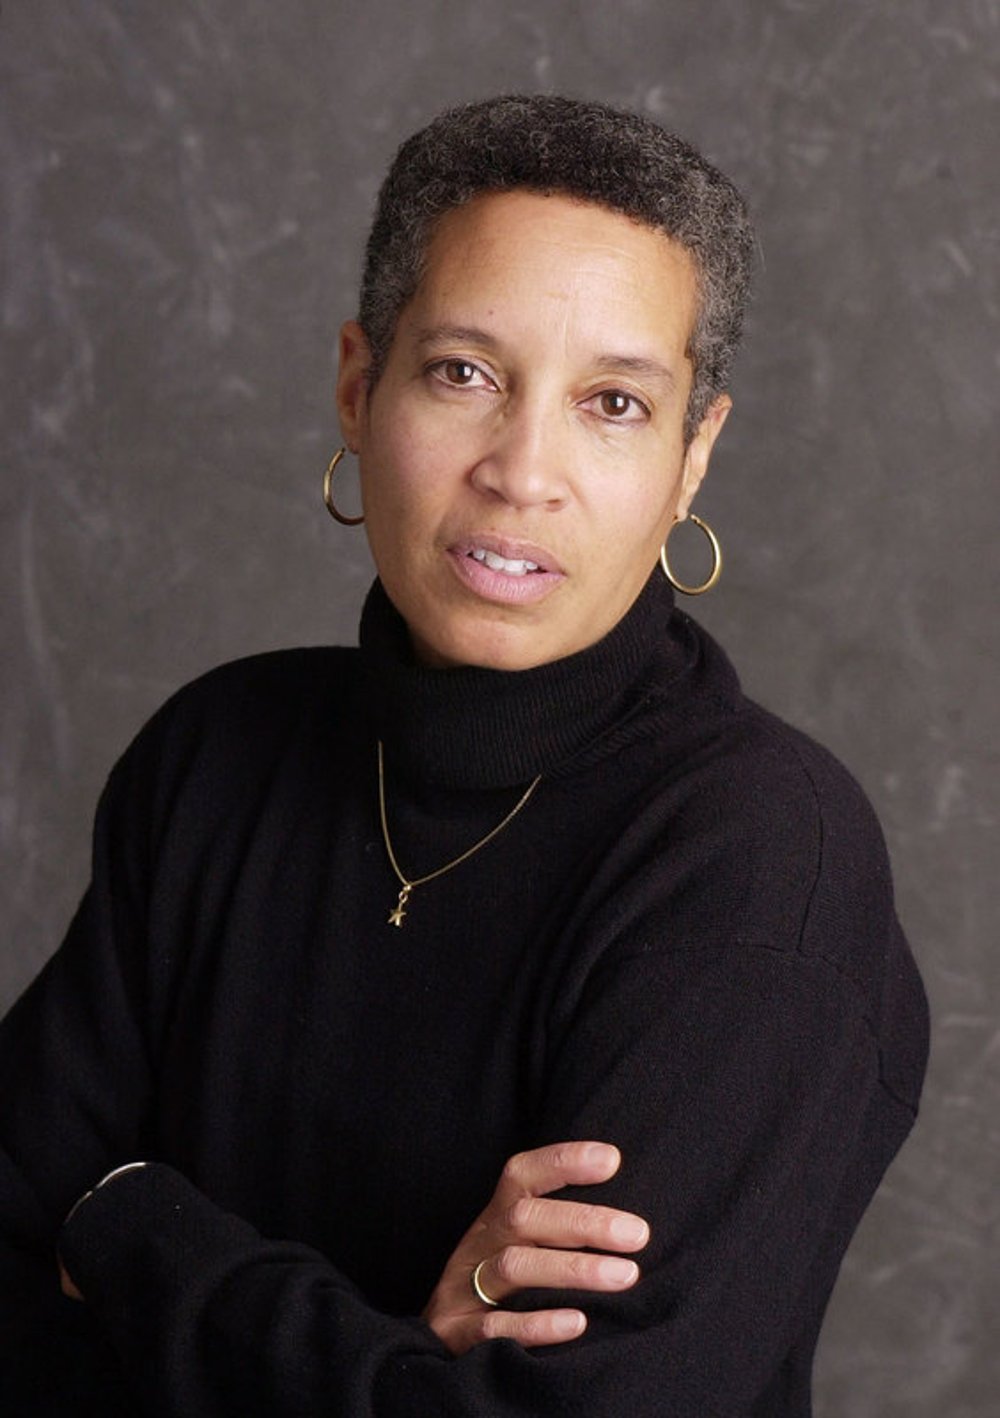 Judge Cordell, staring directly into the camera with her arms folded across her chest. She is wearing gold hoop earrings, a black turtleneck, a gold chain necklace with a small pendant hanging from it